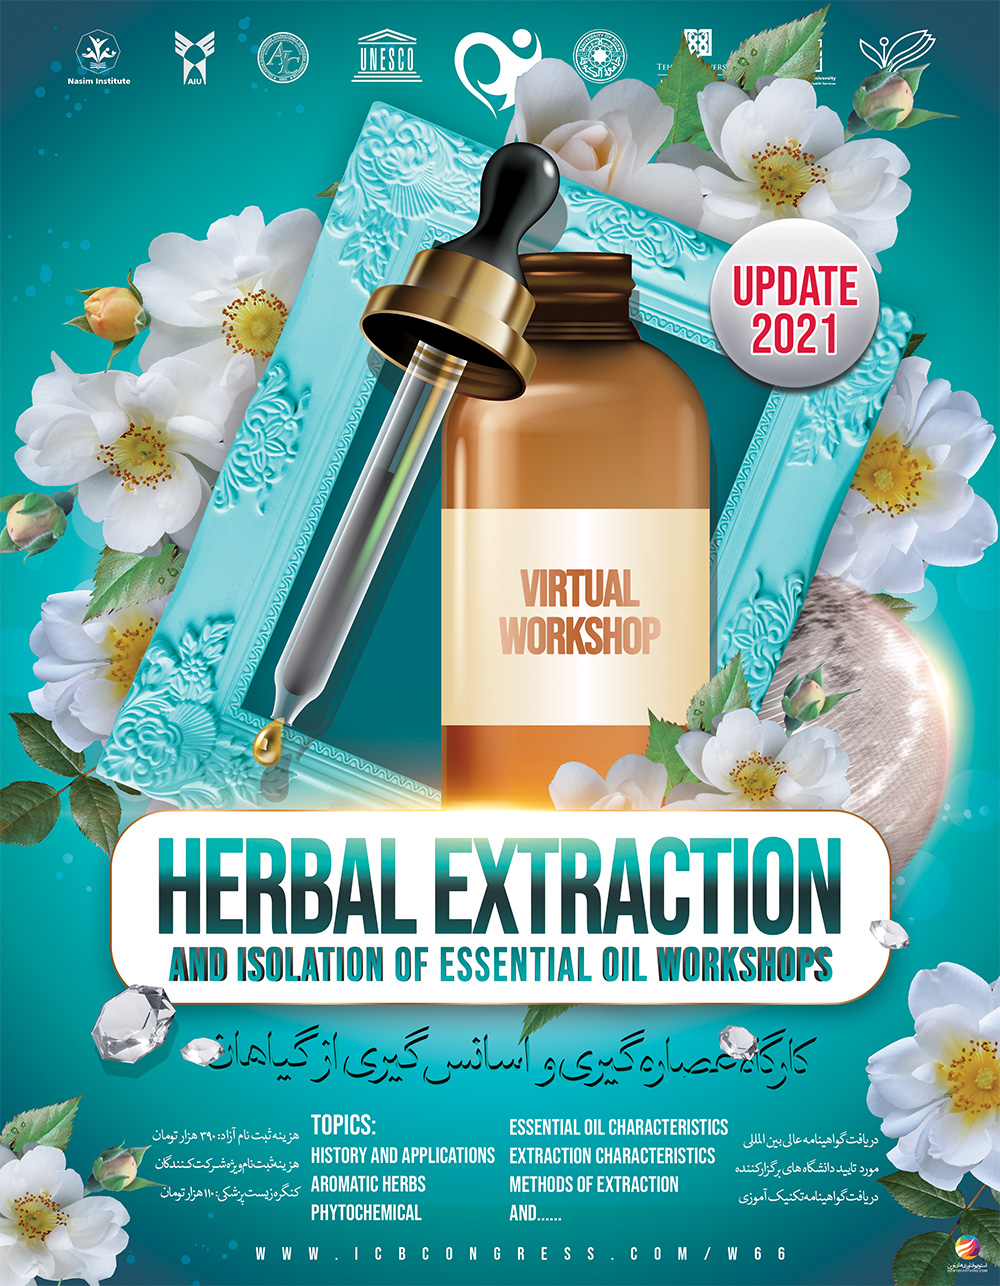 Herbal Extraction and Isolation of Essential Oil Workshops